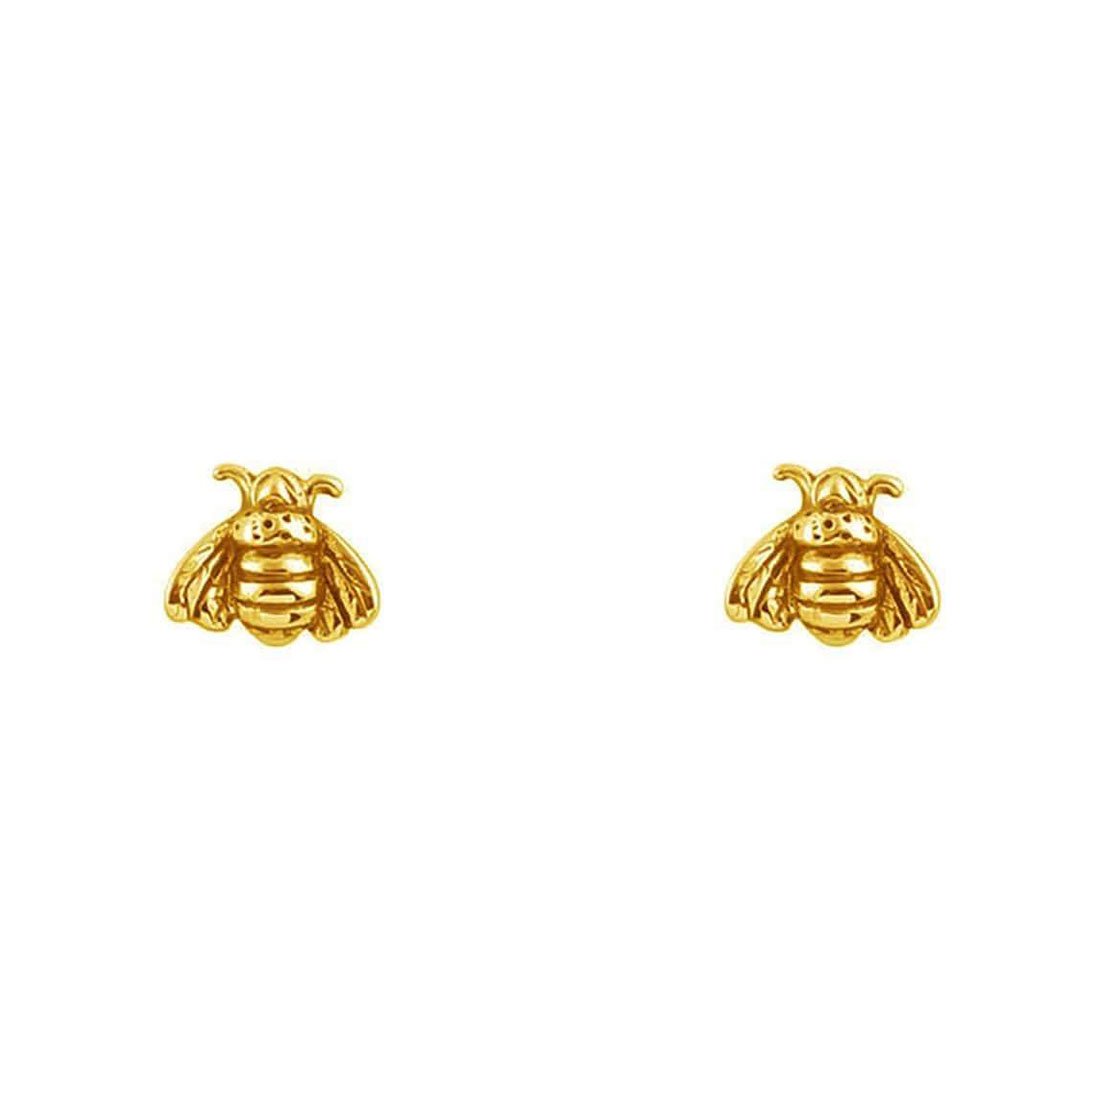 Pollination Bee Studs - Gold